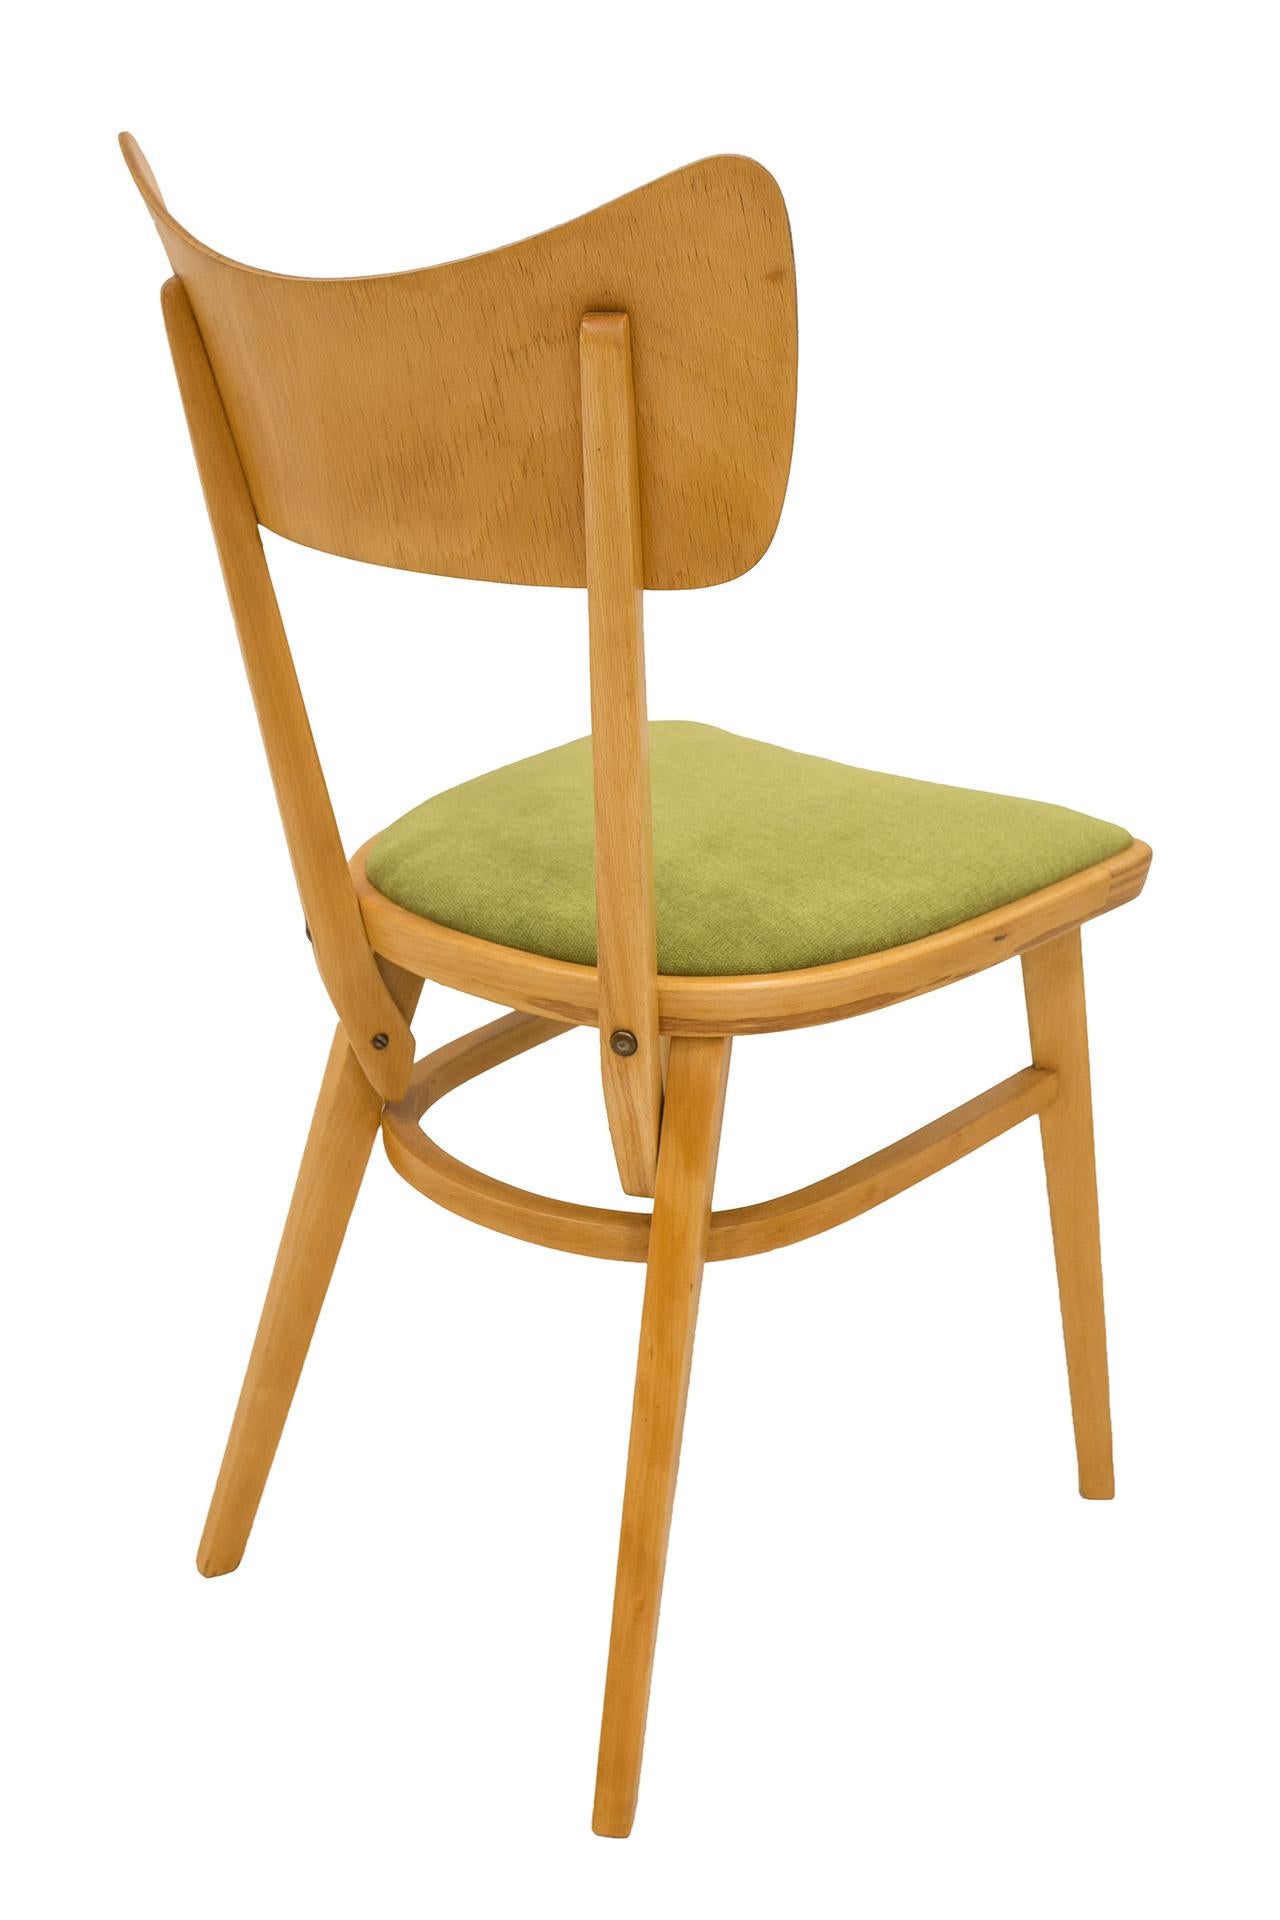 This set of four chairs was made in Czechoslovakia in the 1960s. The frame of the chair was made of beechwood, the profiled backrest of the chair was made of bent plywood and overall it is a very solid construction. The wooden elements underwent a